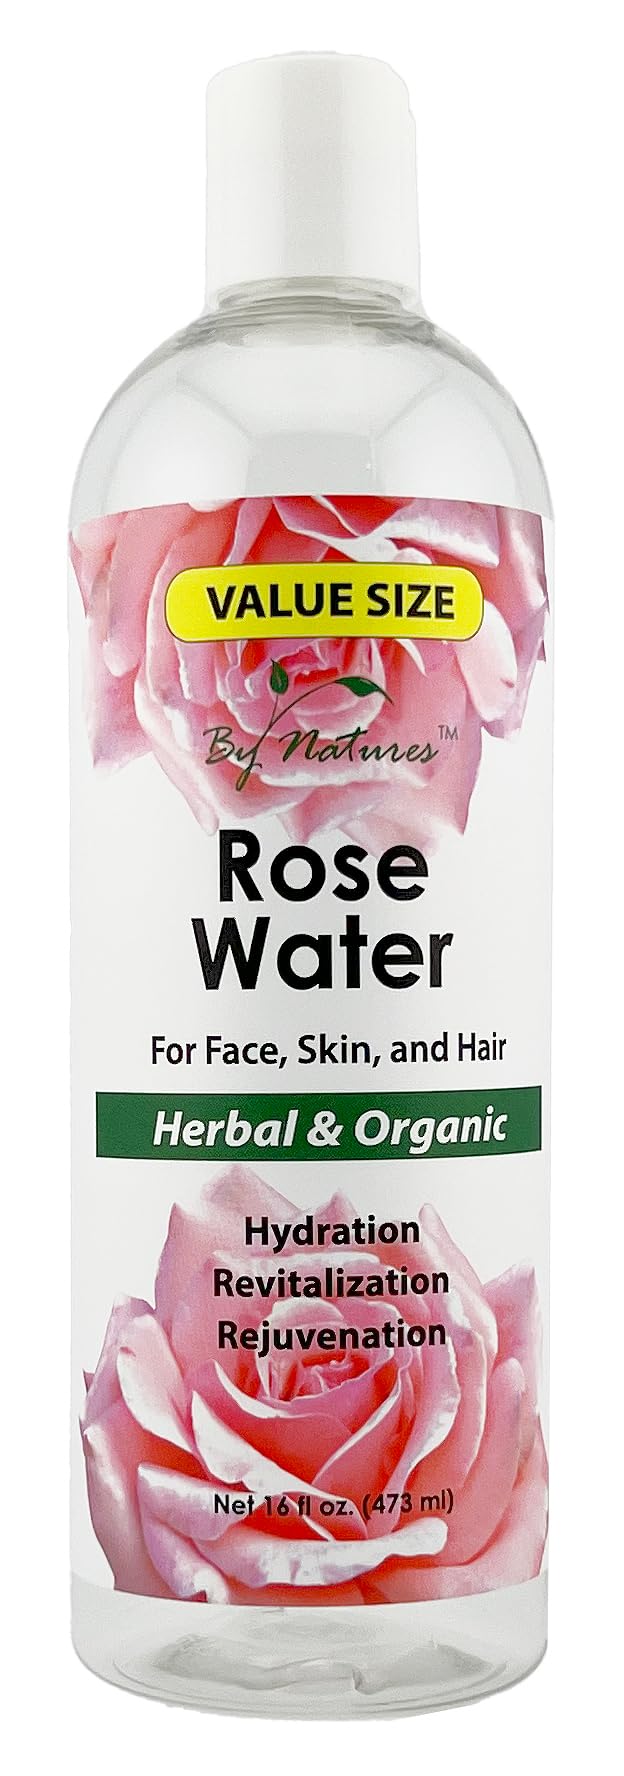 By Natures Rose Water Herbal & Organic 16.0 Fl Oz (Pack of 1)